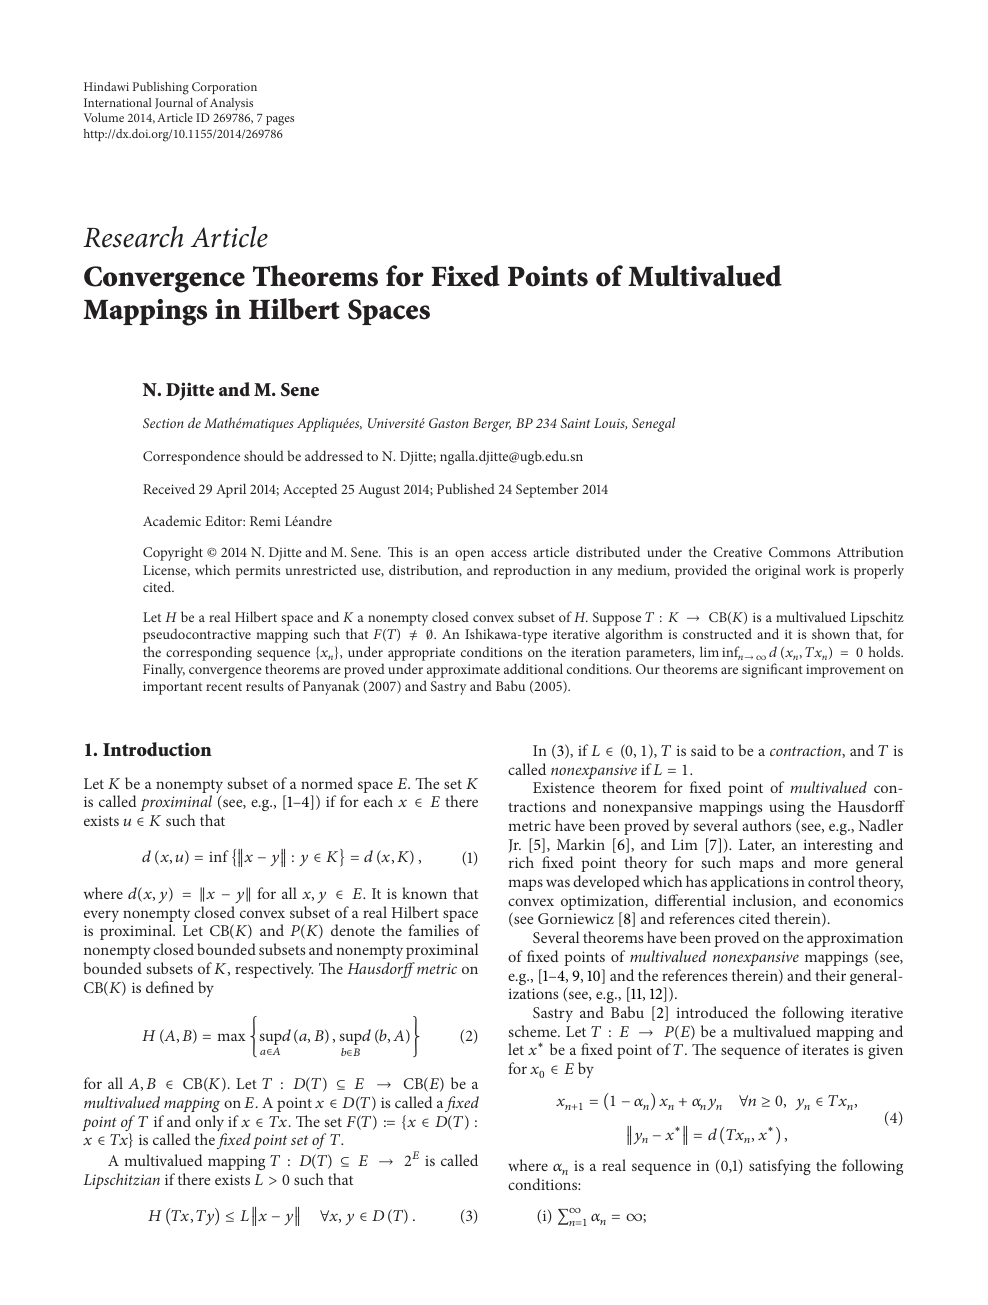 Convergence Theorems For Fixed Points Of Multivalued Mappings In Hilbert Spaces Topic Of Research Paper In Mathematics Download Scholarly Article Pdf And Read For Free On Cyberleninka Open Science Hub